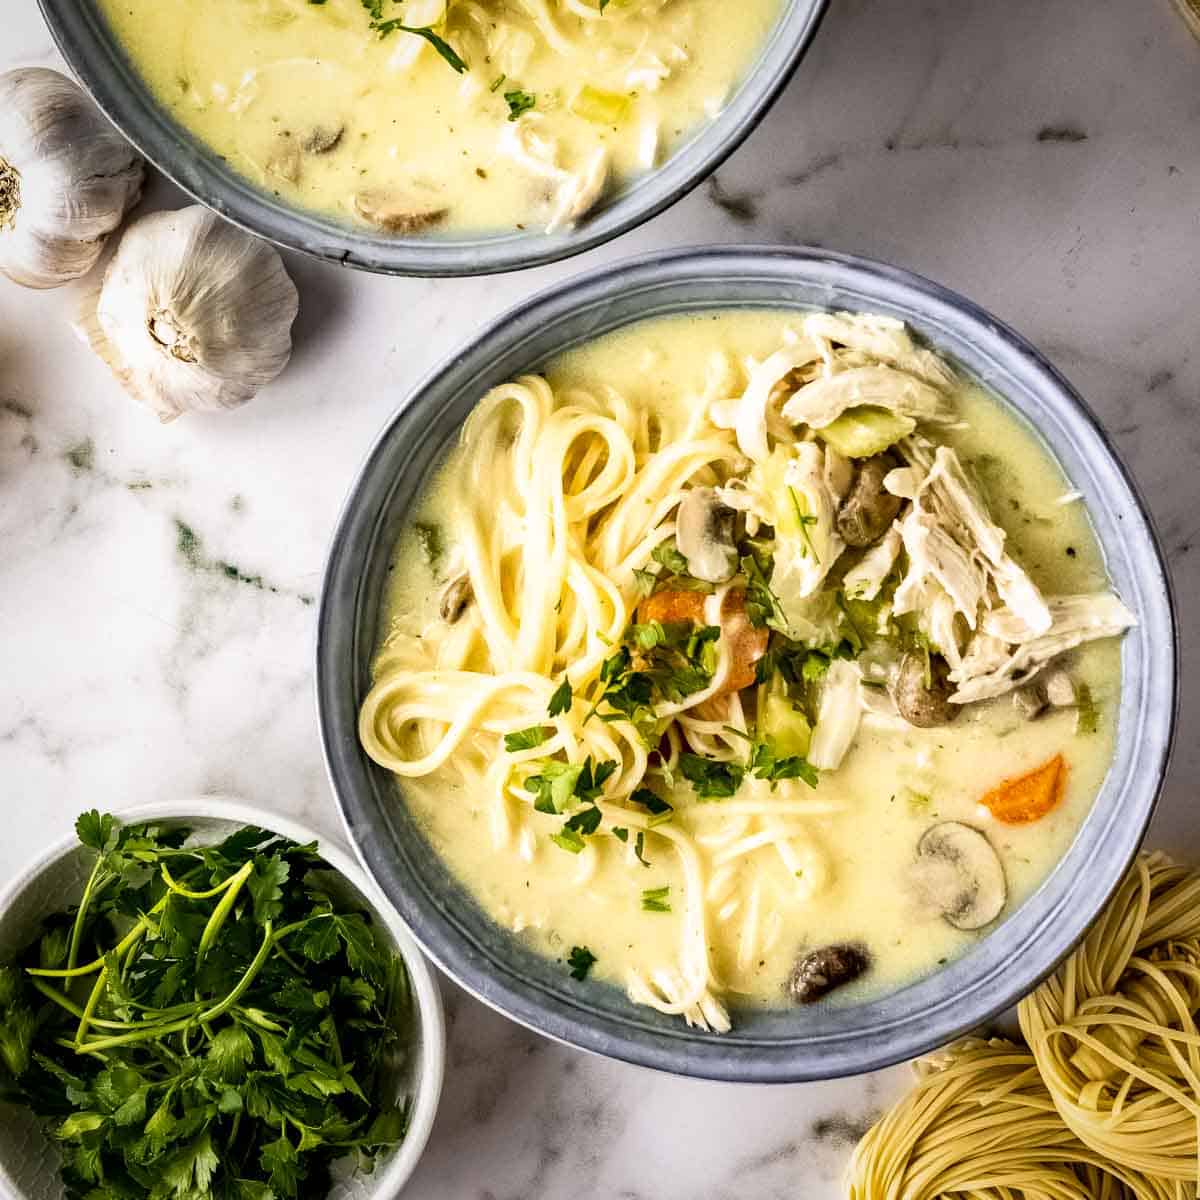 Overhead shot of two grey bowls with turkey noodle soup garnished with fresh herbs on a marble countertop, with a bowl of parsley, garlic cloves, and uncooked egg noodles on the side.